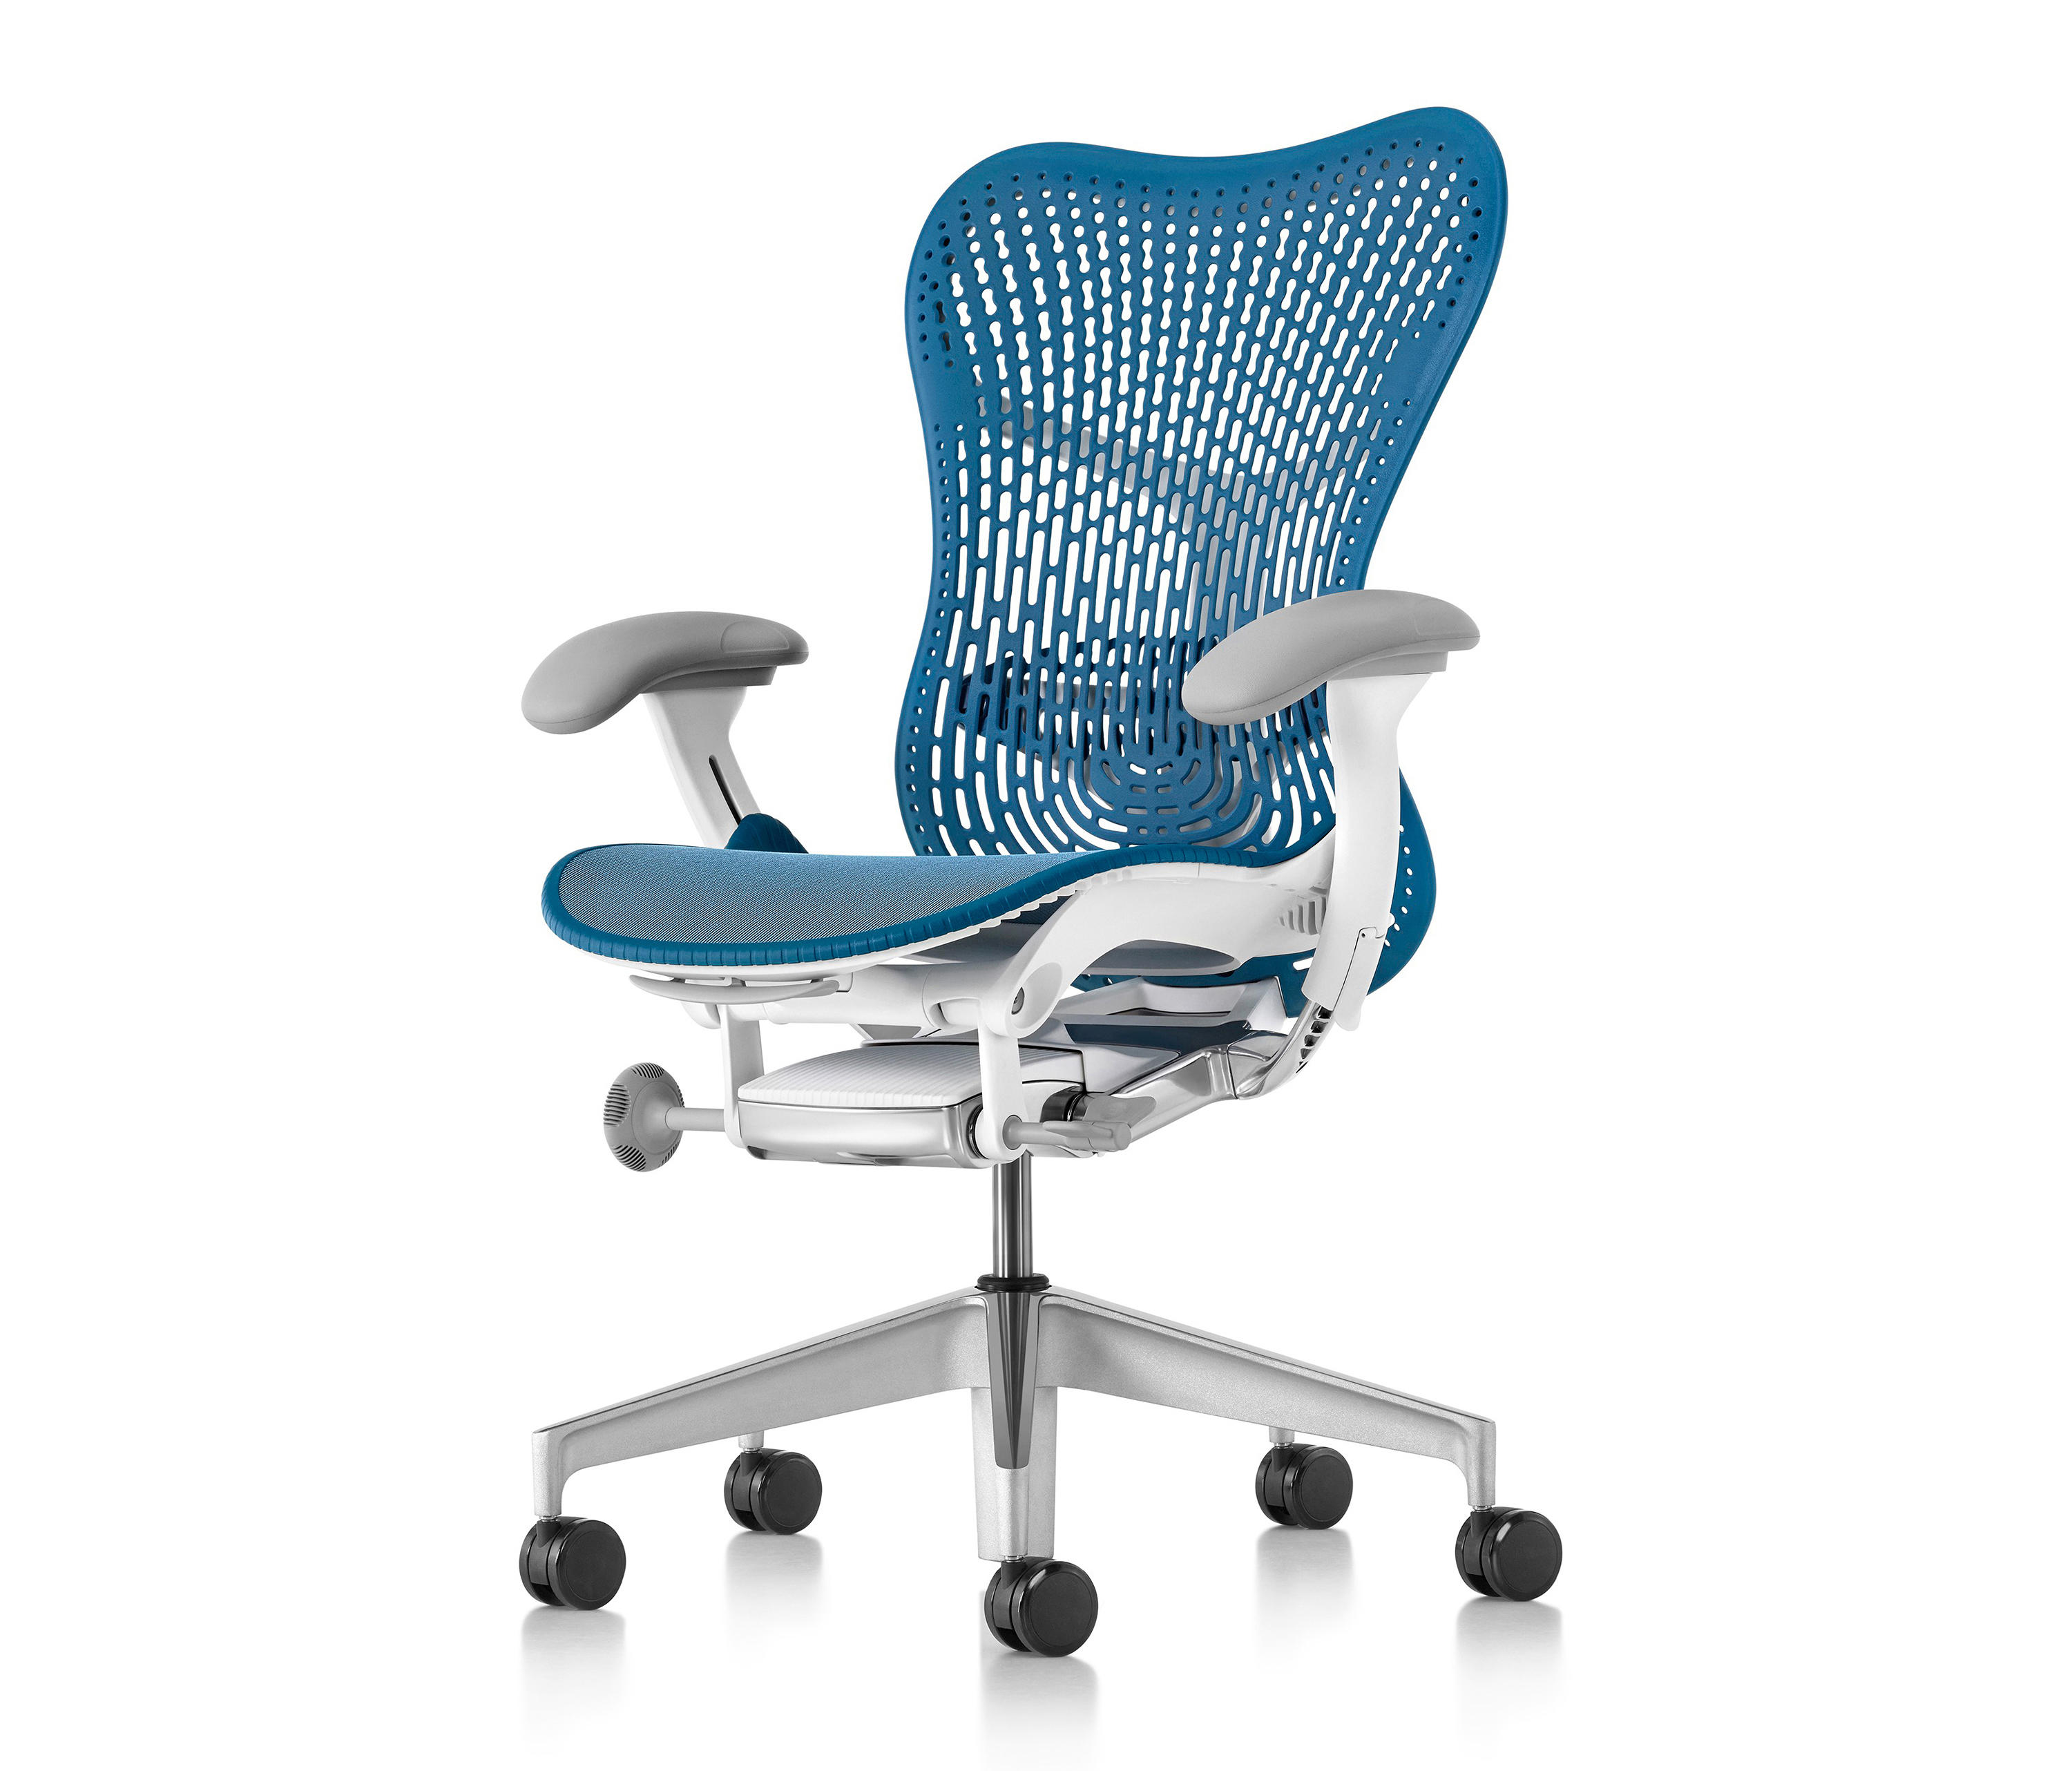 MIRRA 2 CHAIR - Office chairs from Herman Miller | Architonic